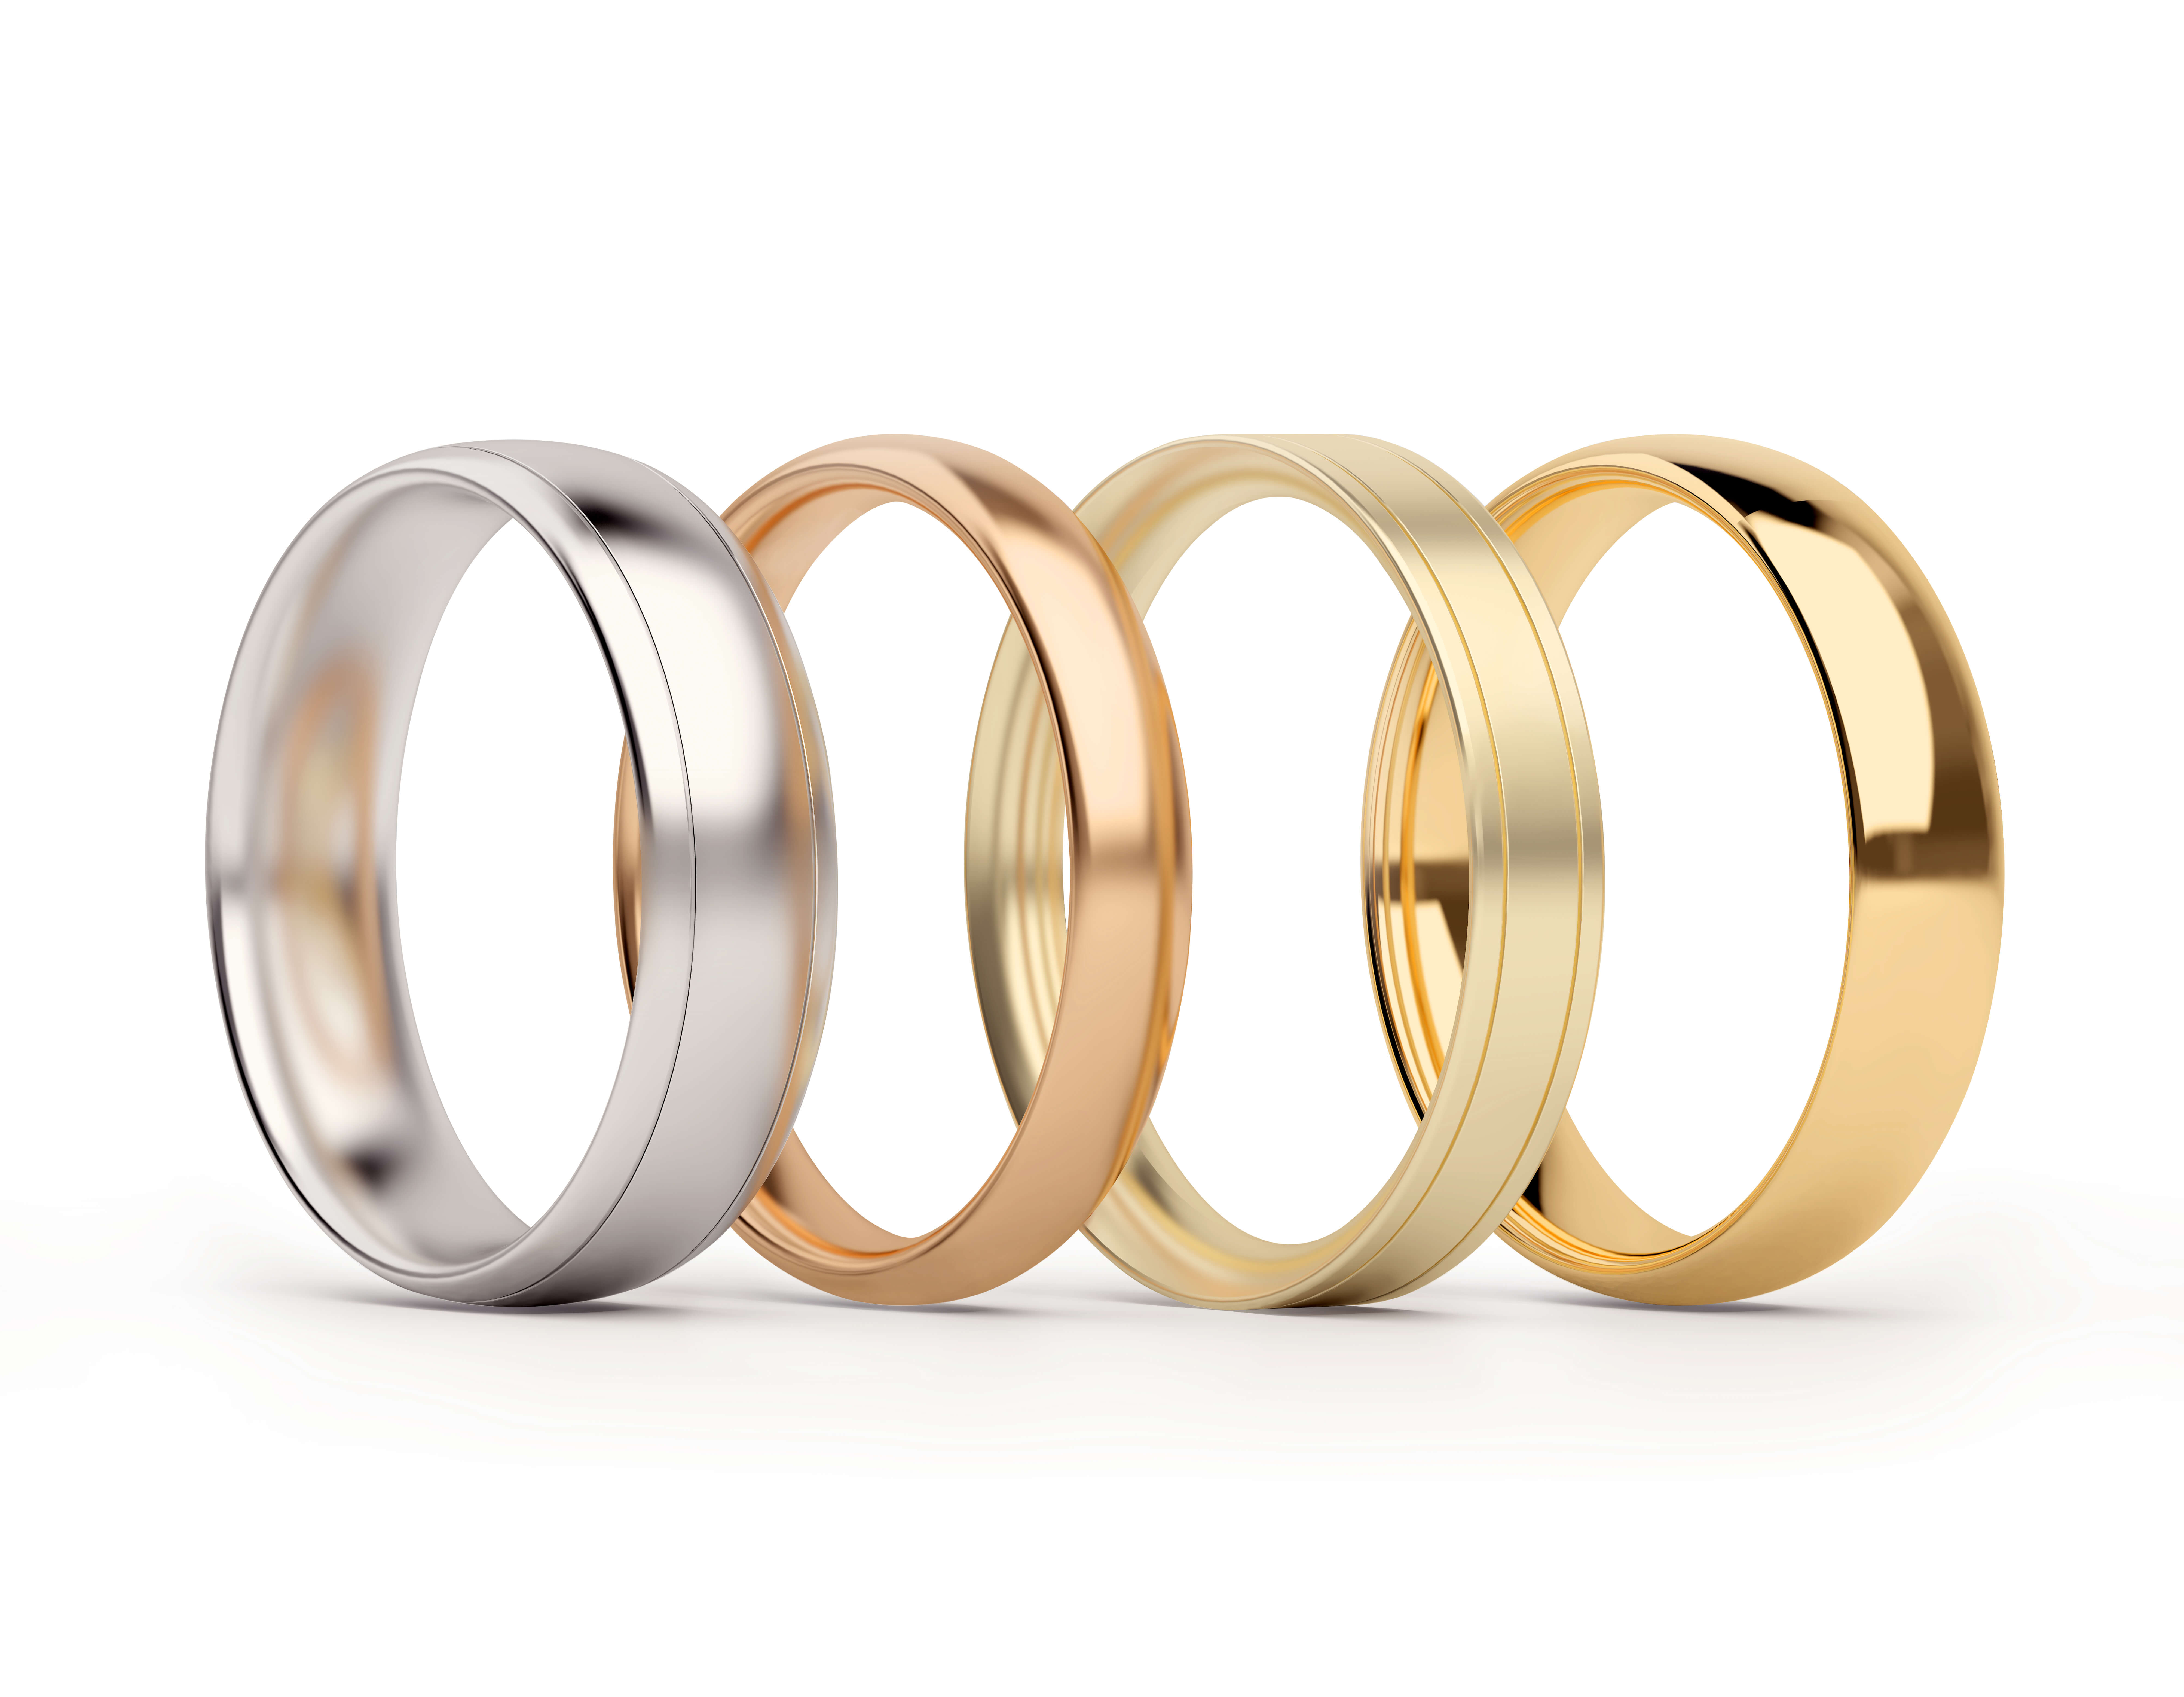 Four plated rings sets against a white background, with different colors of rose gold, white gold, yellow gold, and matte finished yellow gold.